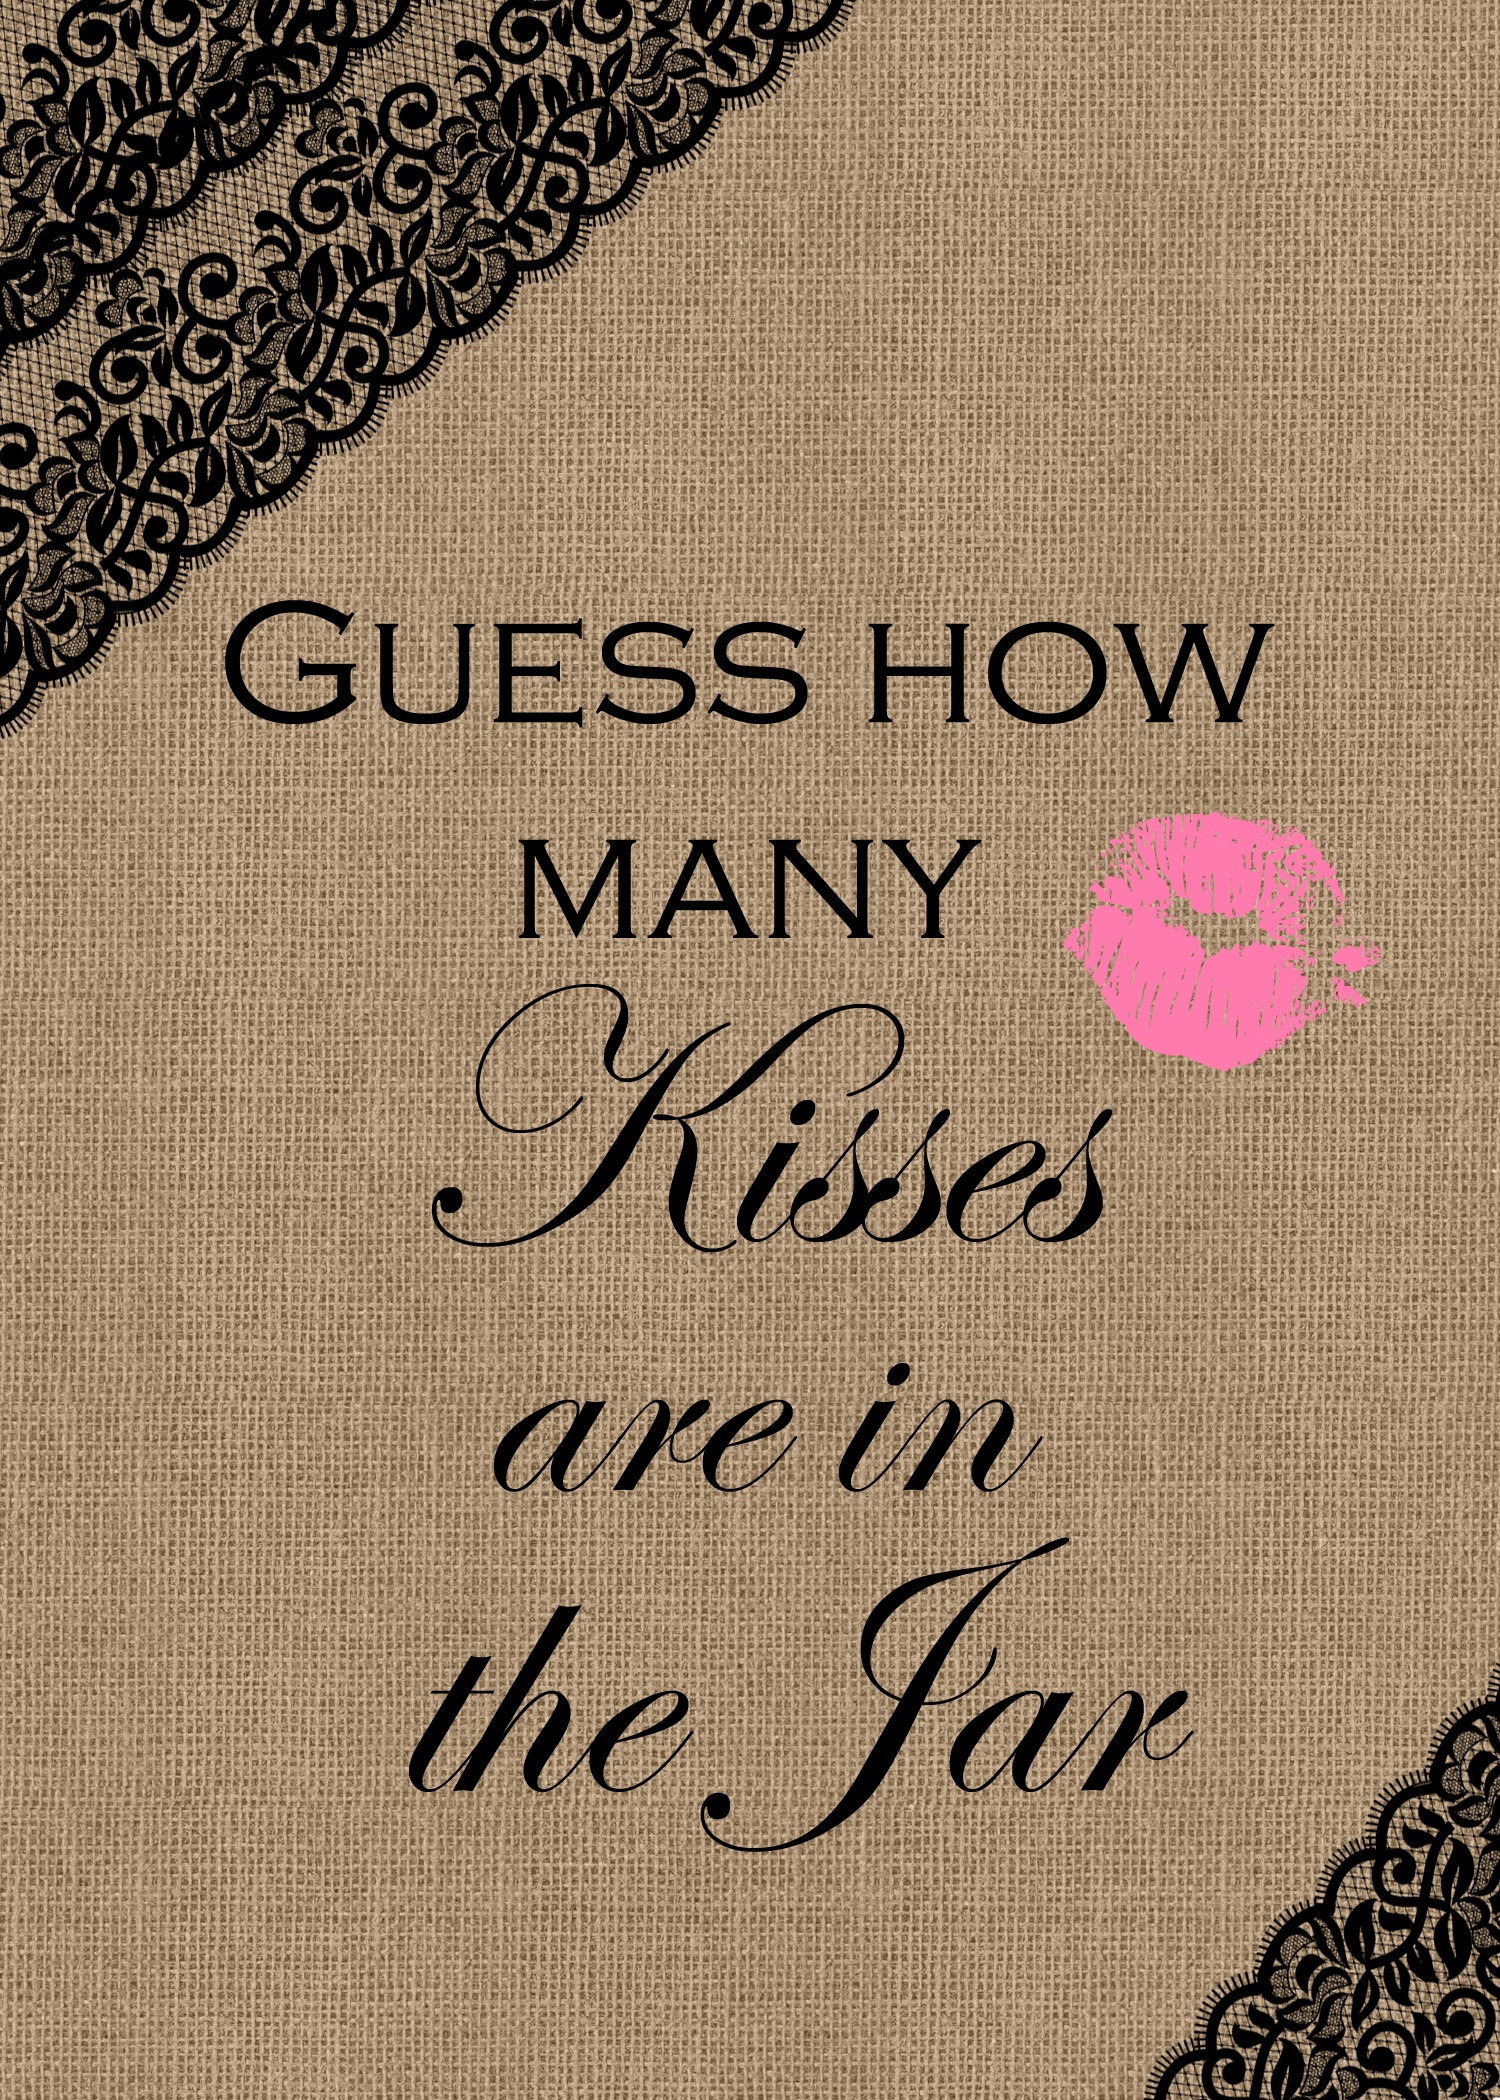 2_Free_Printable_Games Archives - Bridal Shower Ideas - Themes - How Many Kisses Game Free Printable